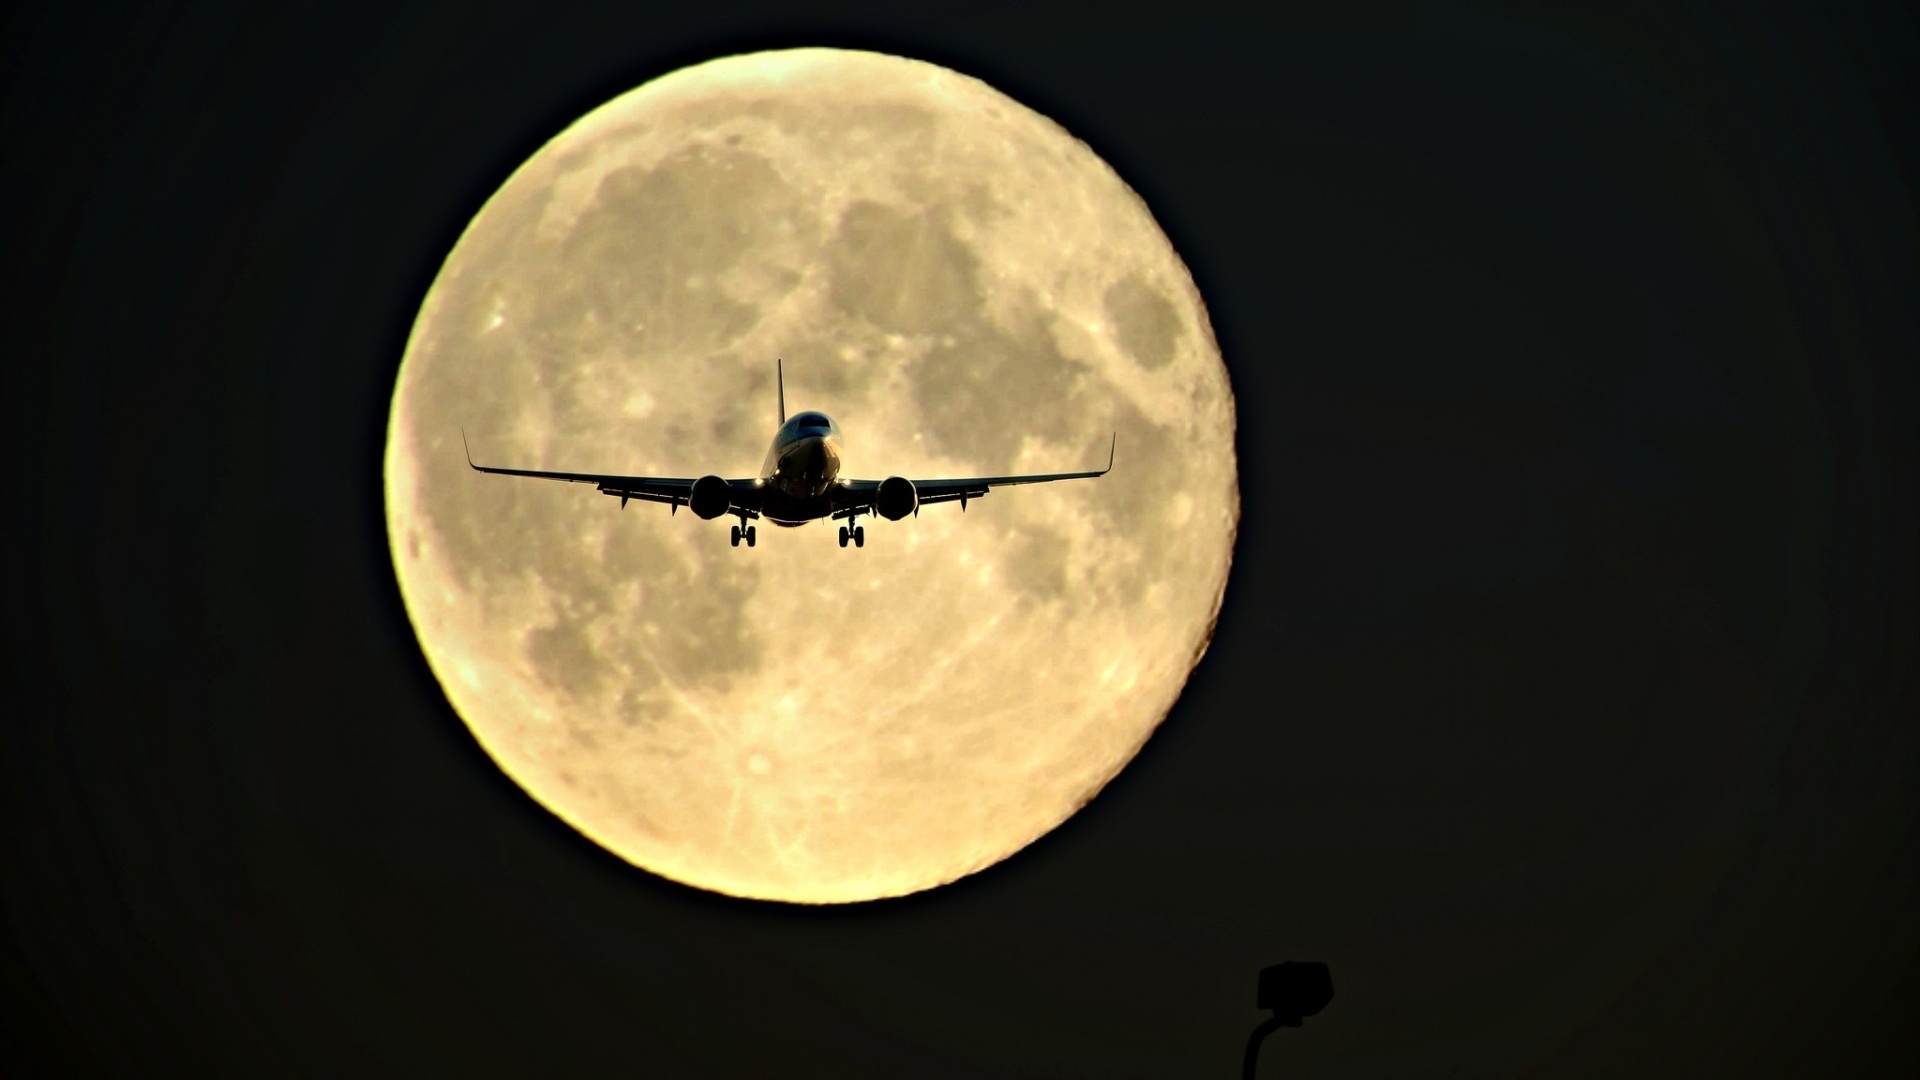 Wallpaper | Aviation | photo | picture | the plane, landing, the moon, the  dark background